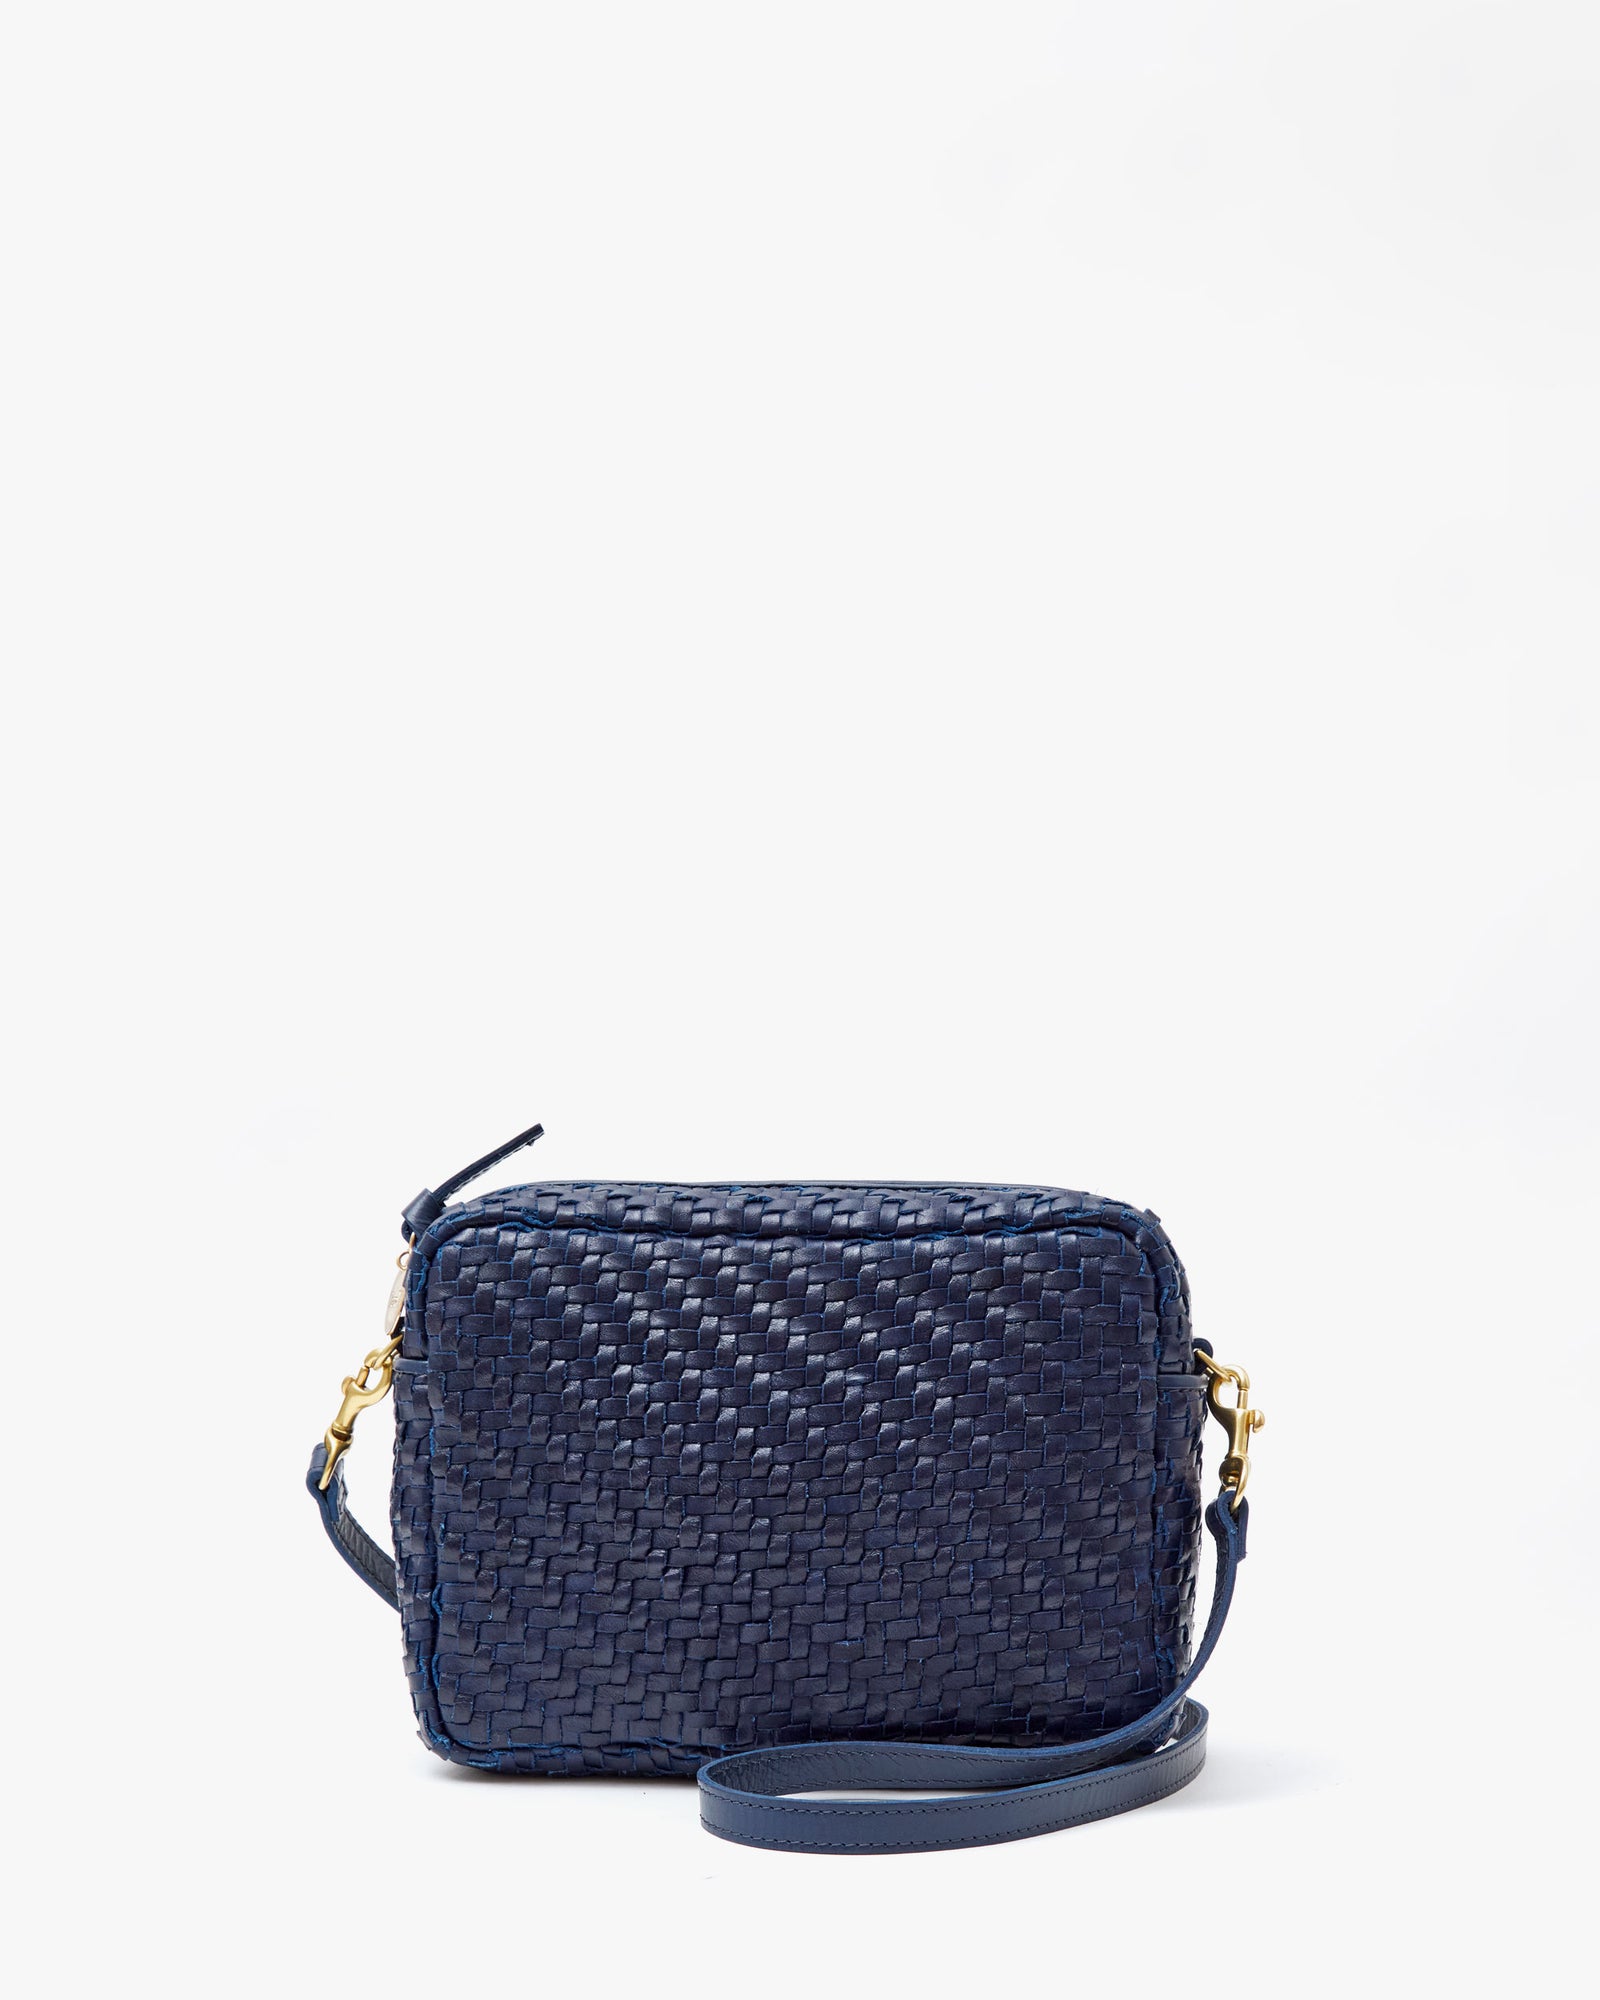 Clare V. - Zig Zag with our woven Midi Sac